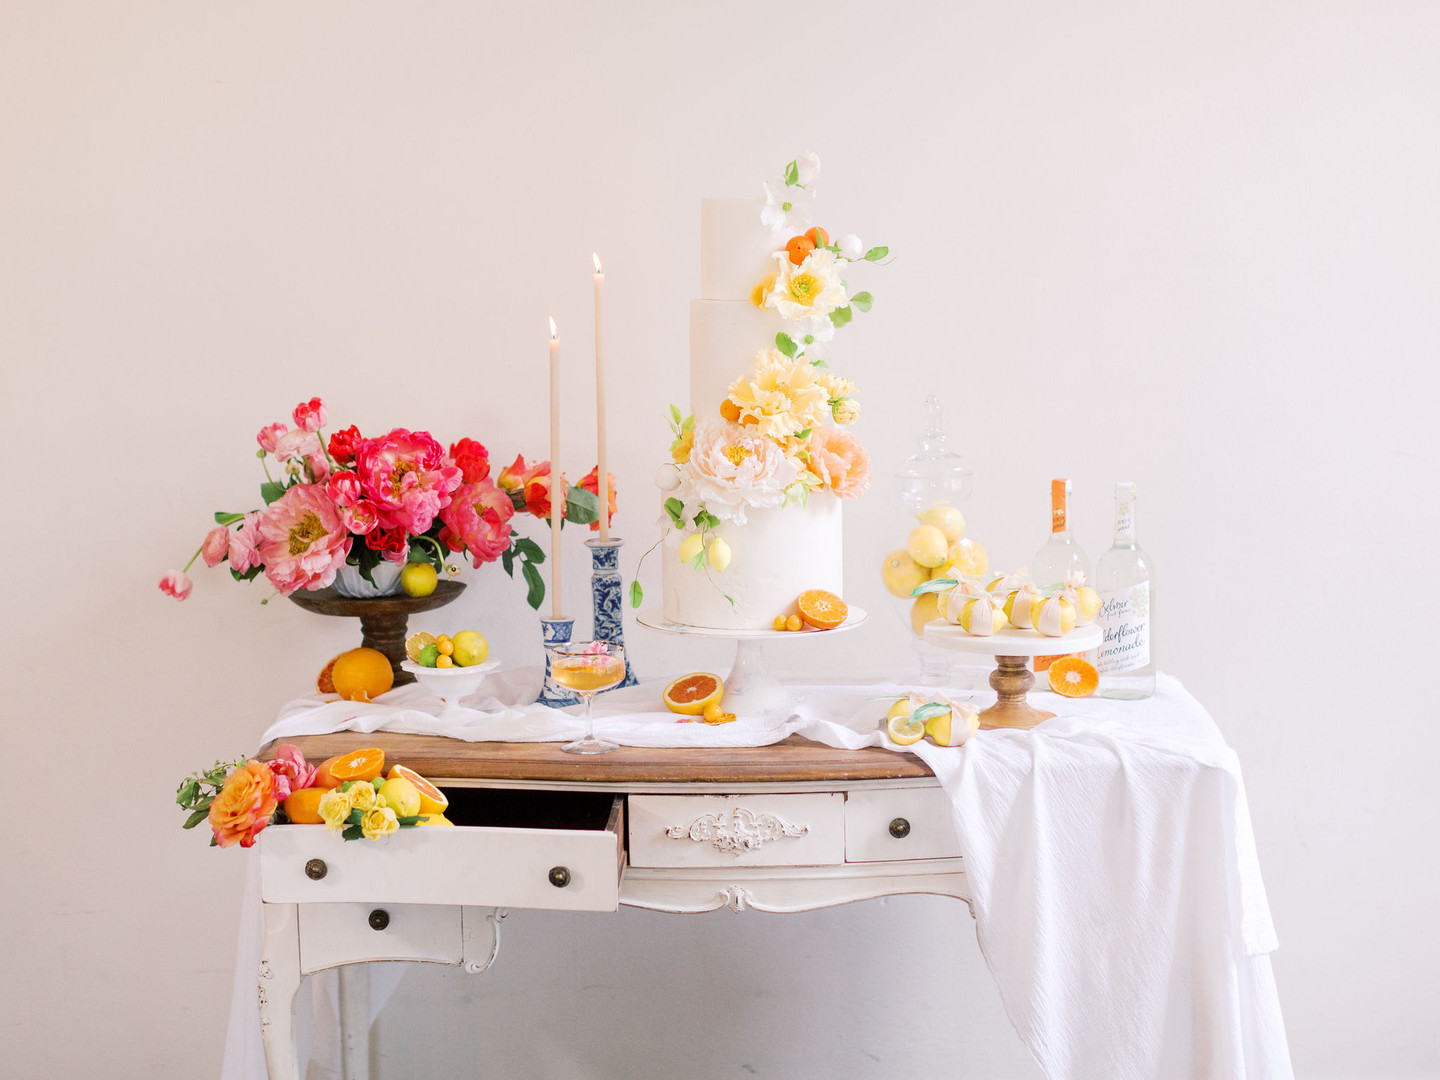 Summer citrus wedding inspiration at historic post office LGBTQ+ weddings two grooms gay wedding blue suit white gray suit orange blue bright colorful summery styled shoot decor cake